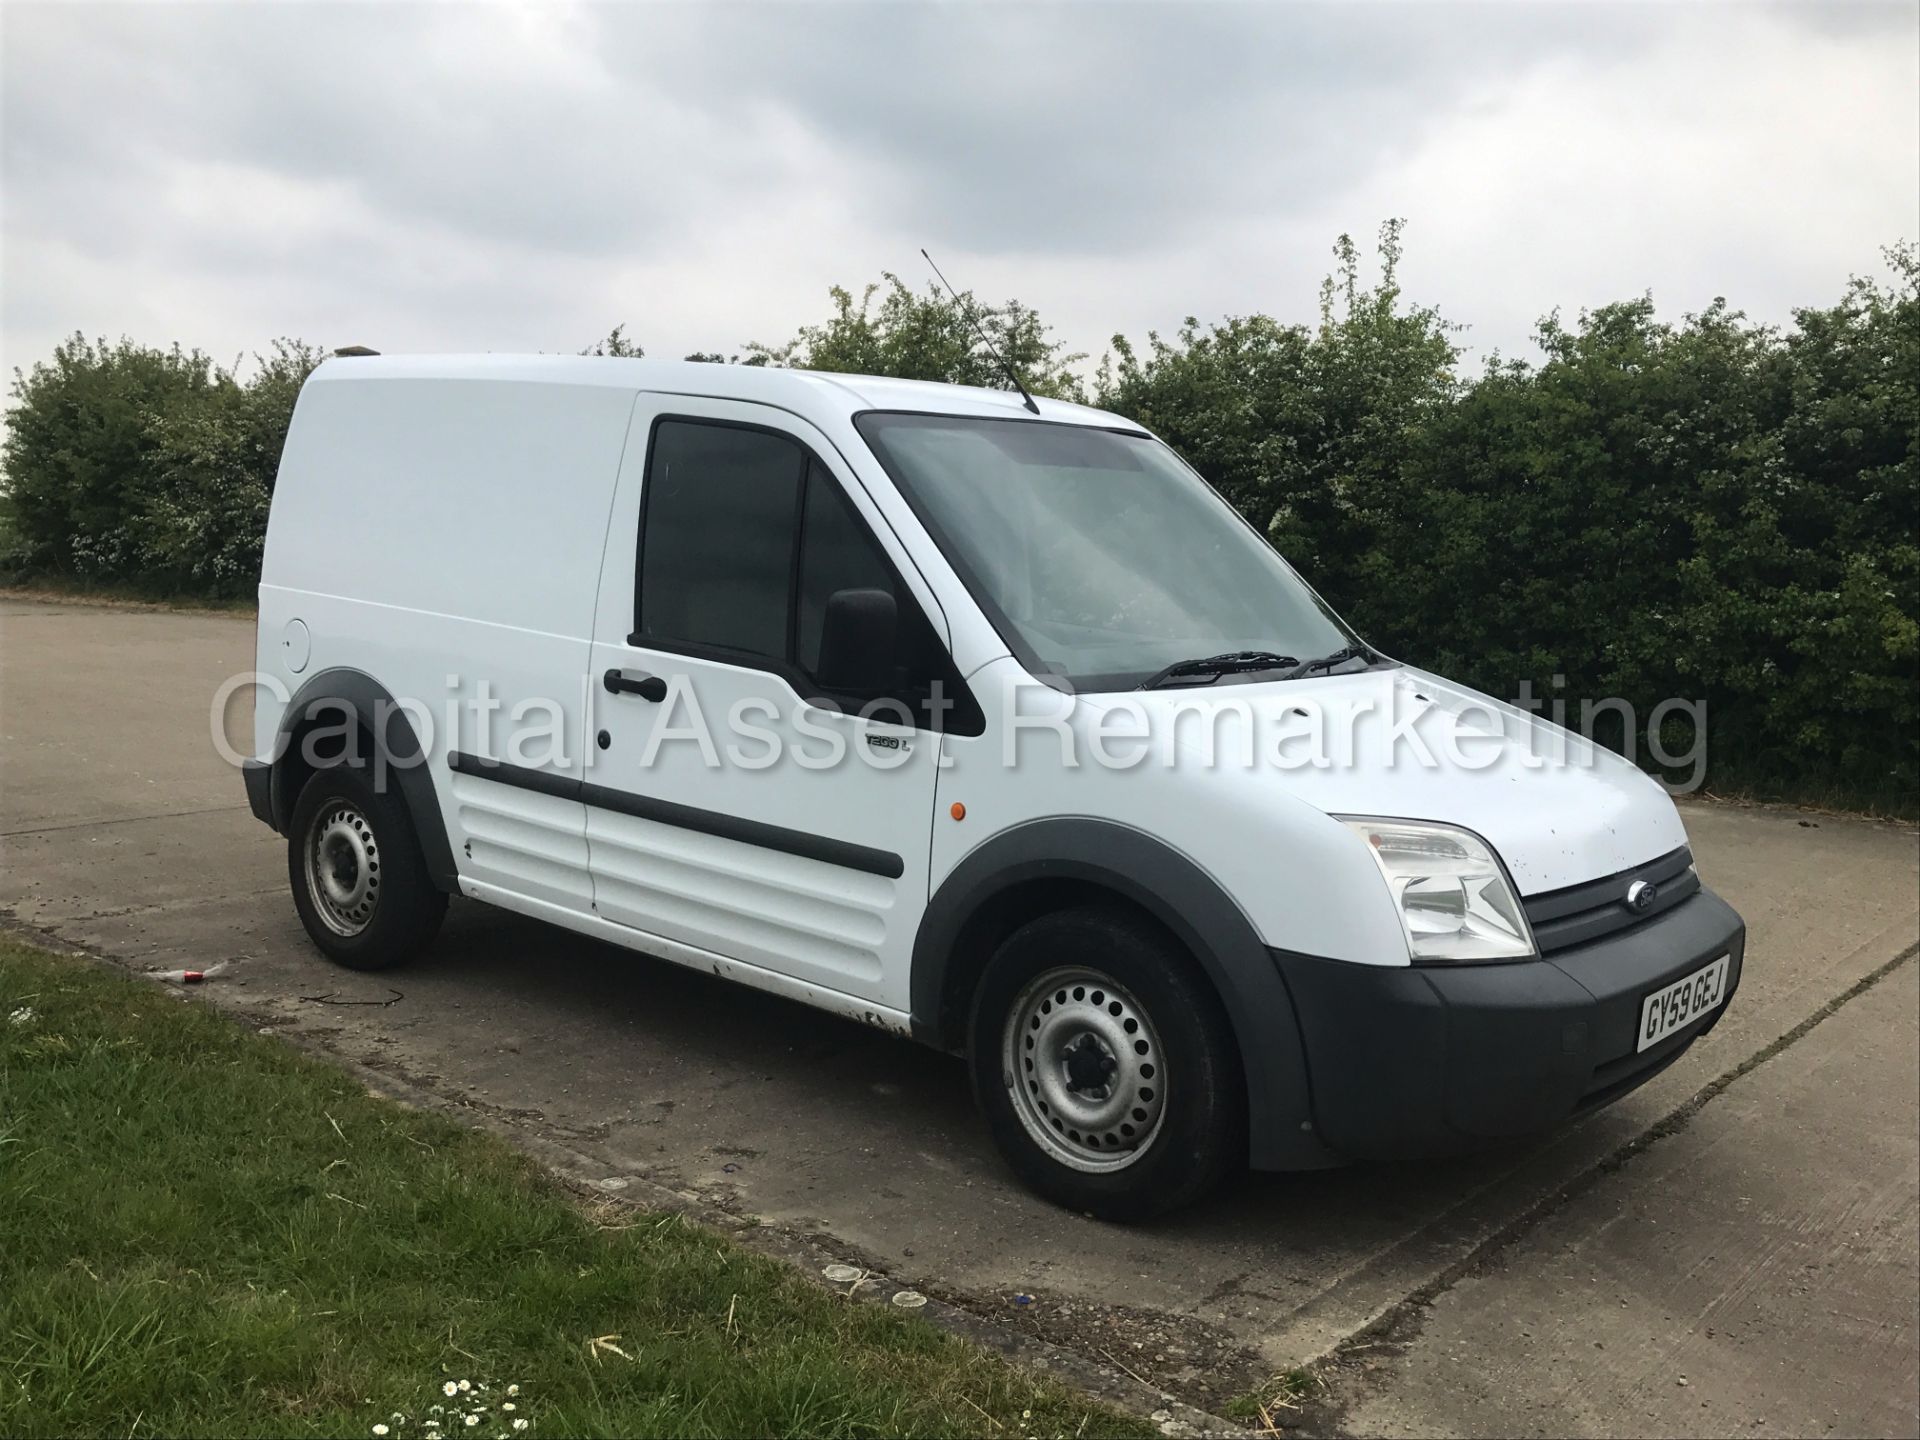 FORD TRANSIT CONNECT 75 T200 (2010 MODEL) '1.8 TDCI - 5 SPEED' 9NO VAT - SAVE 20%) - Image 2 of 18